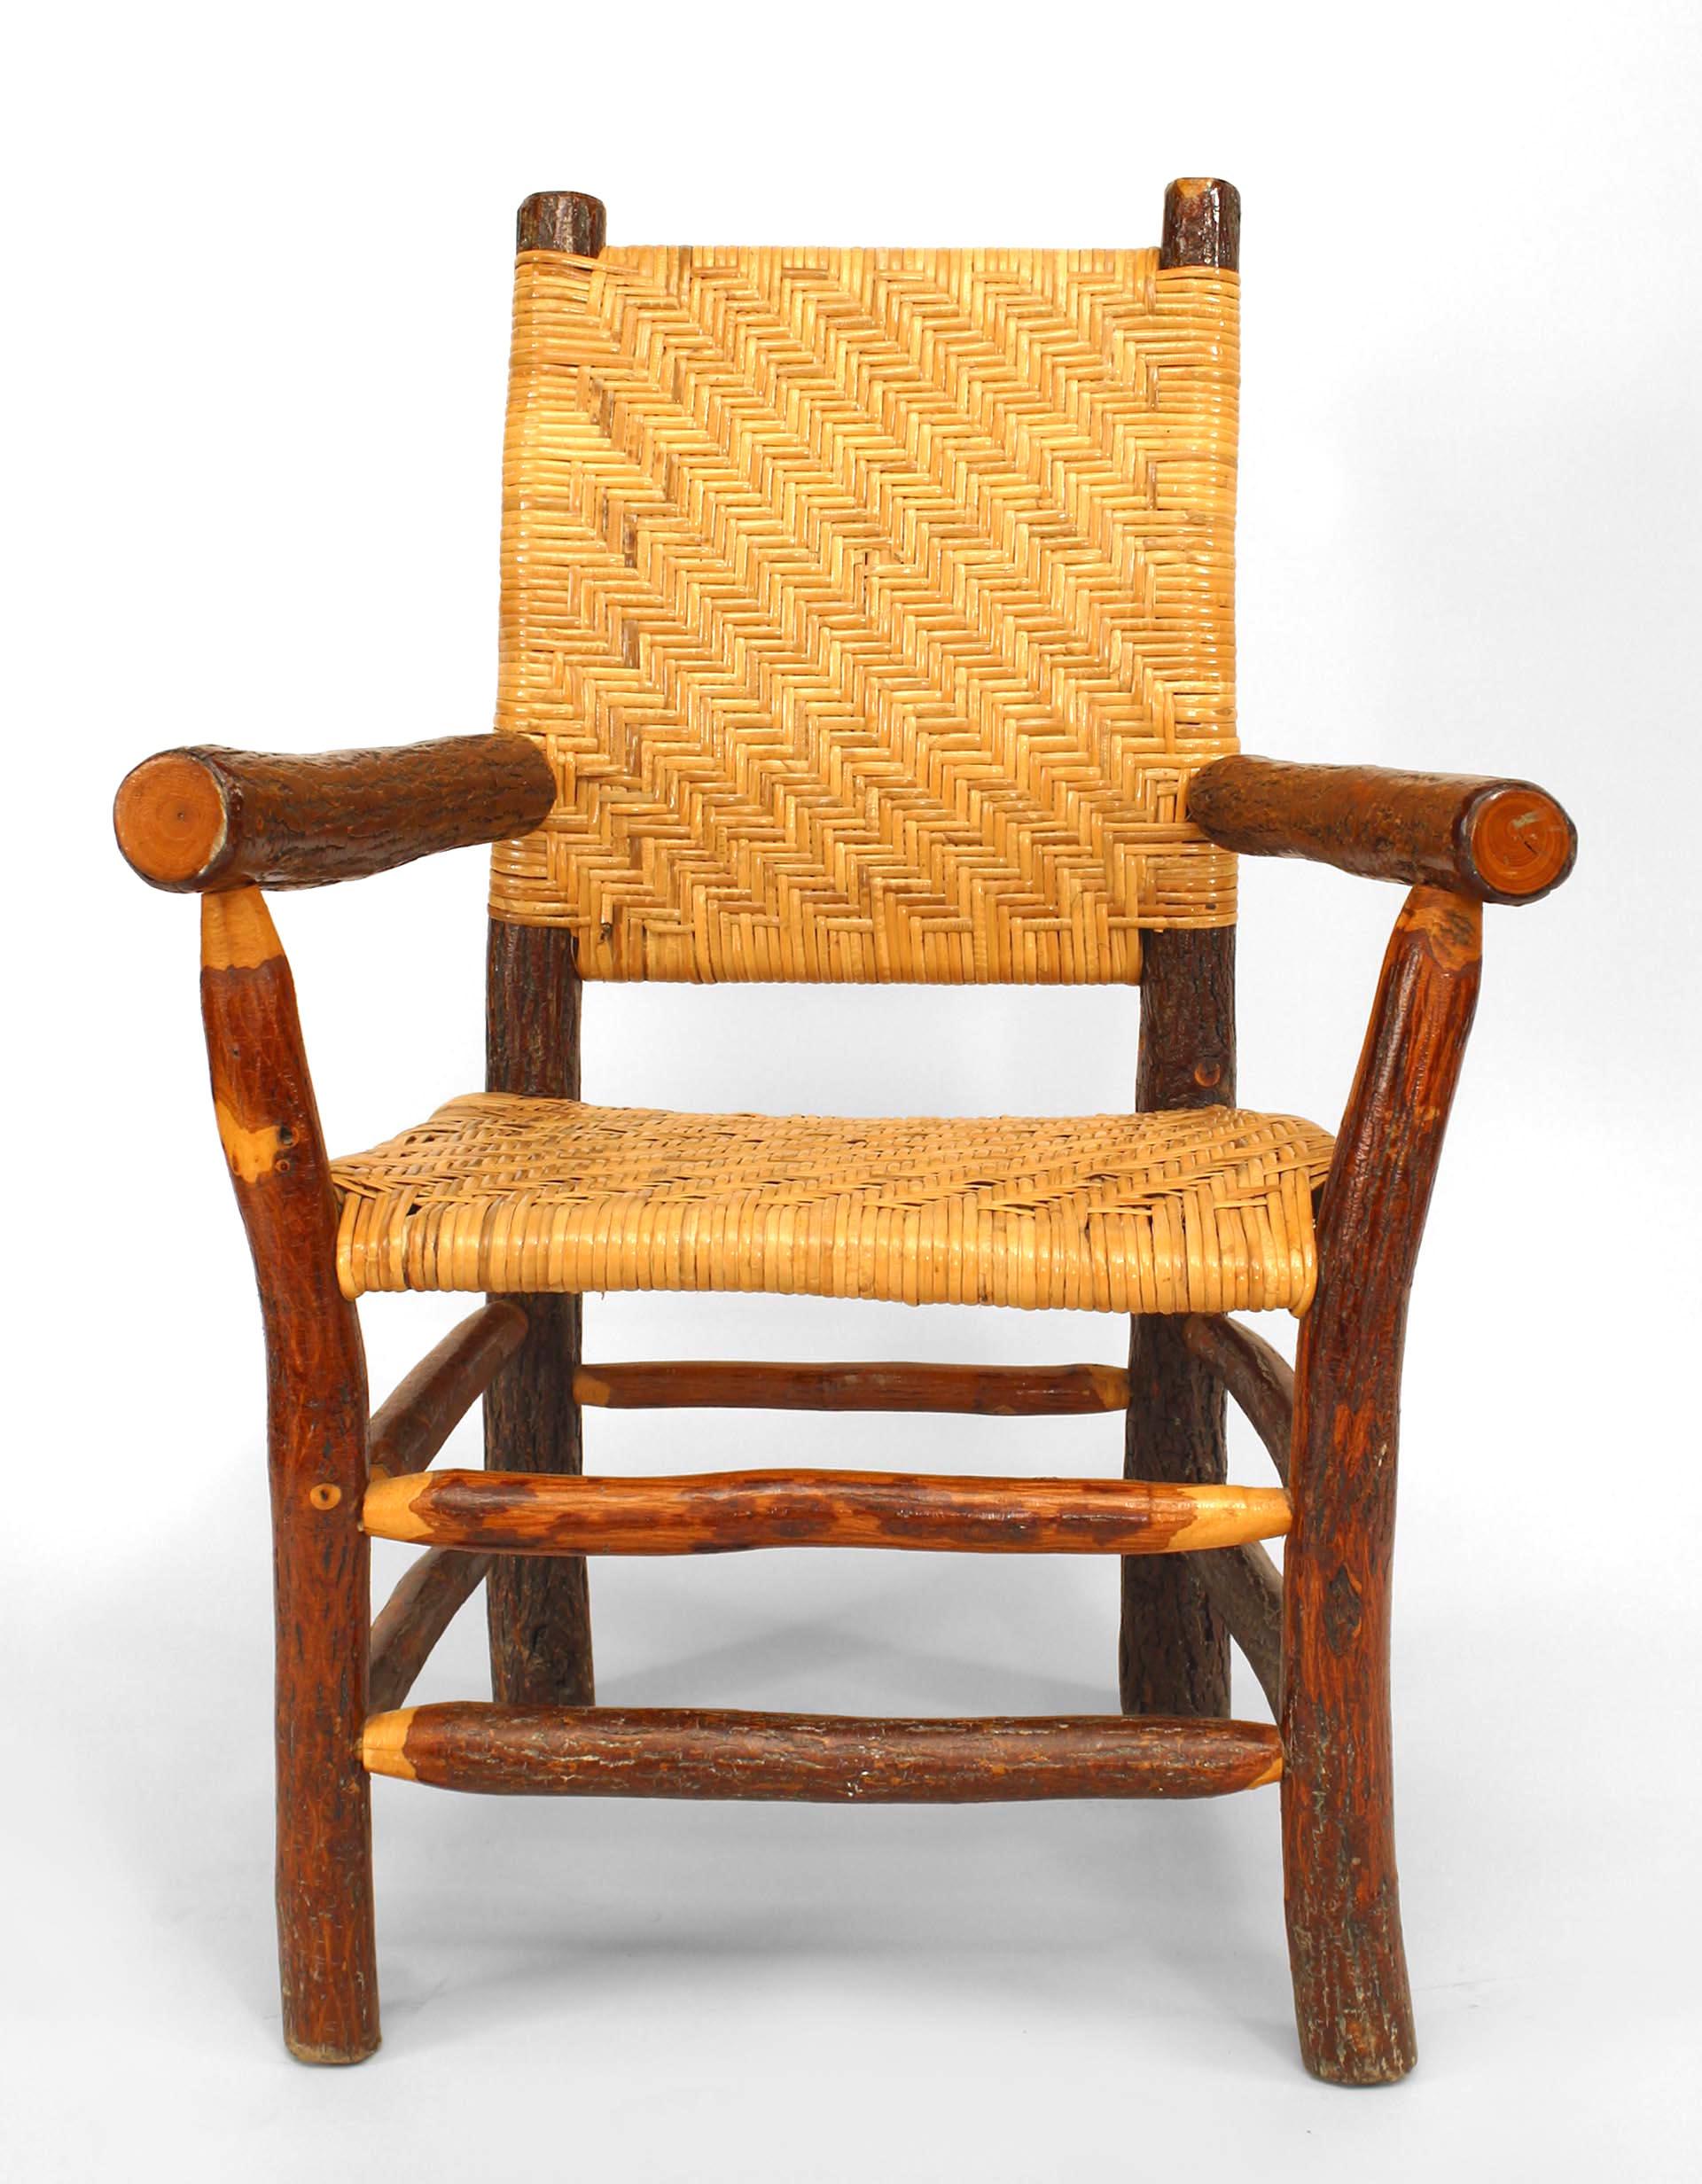 Set of 4 American Rustic Old Hickory (1940s) open arm chairs with a woven seat & back and a box form double stretcher.
